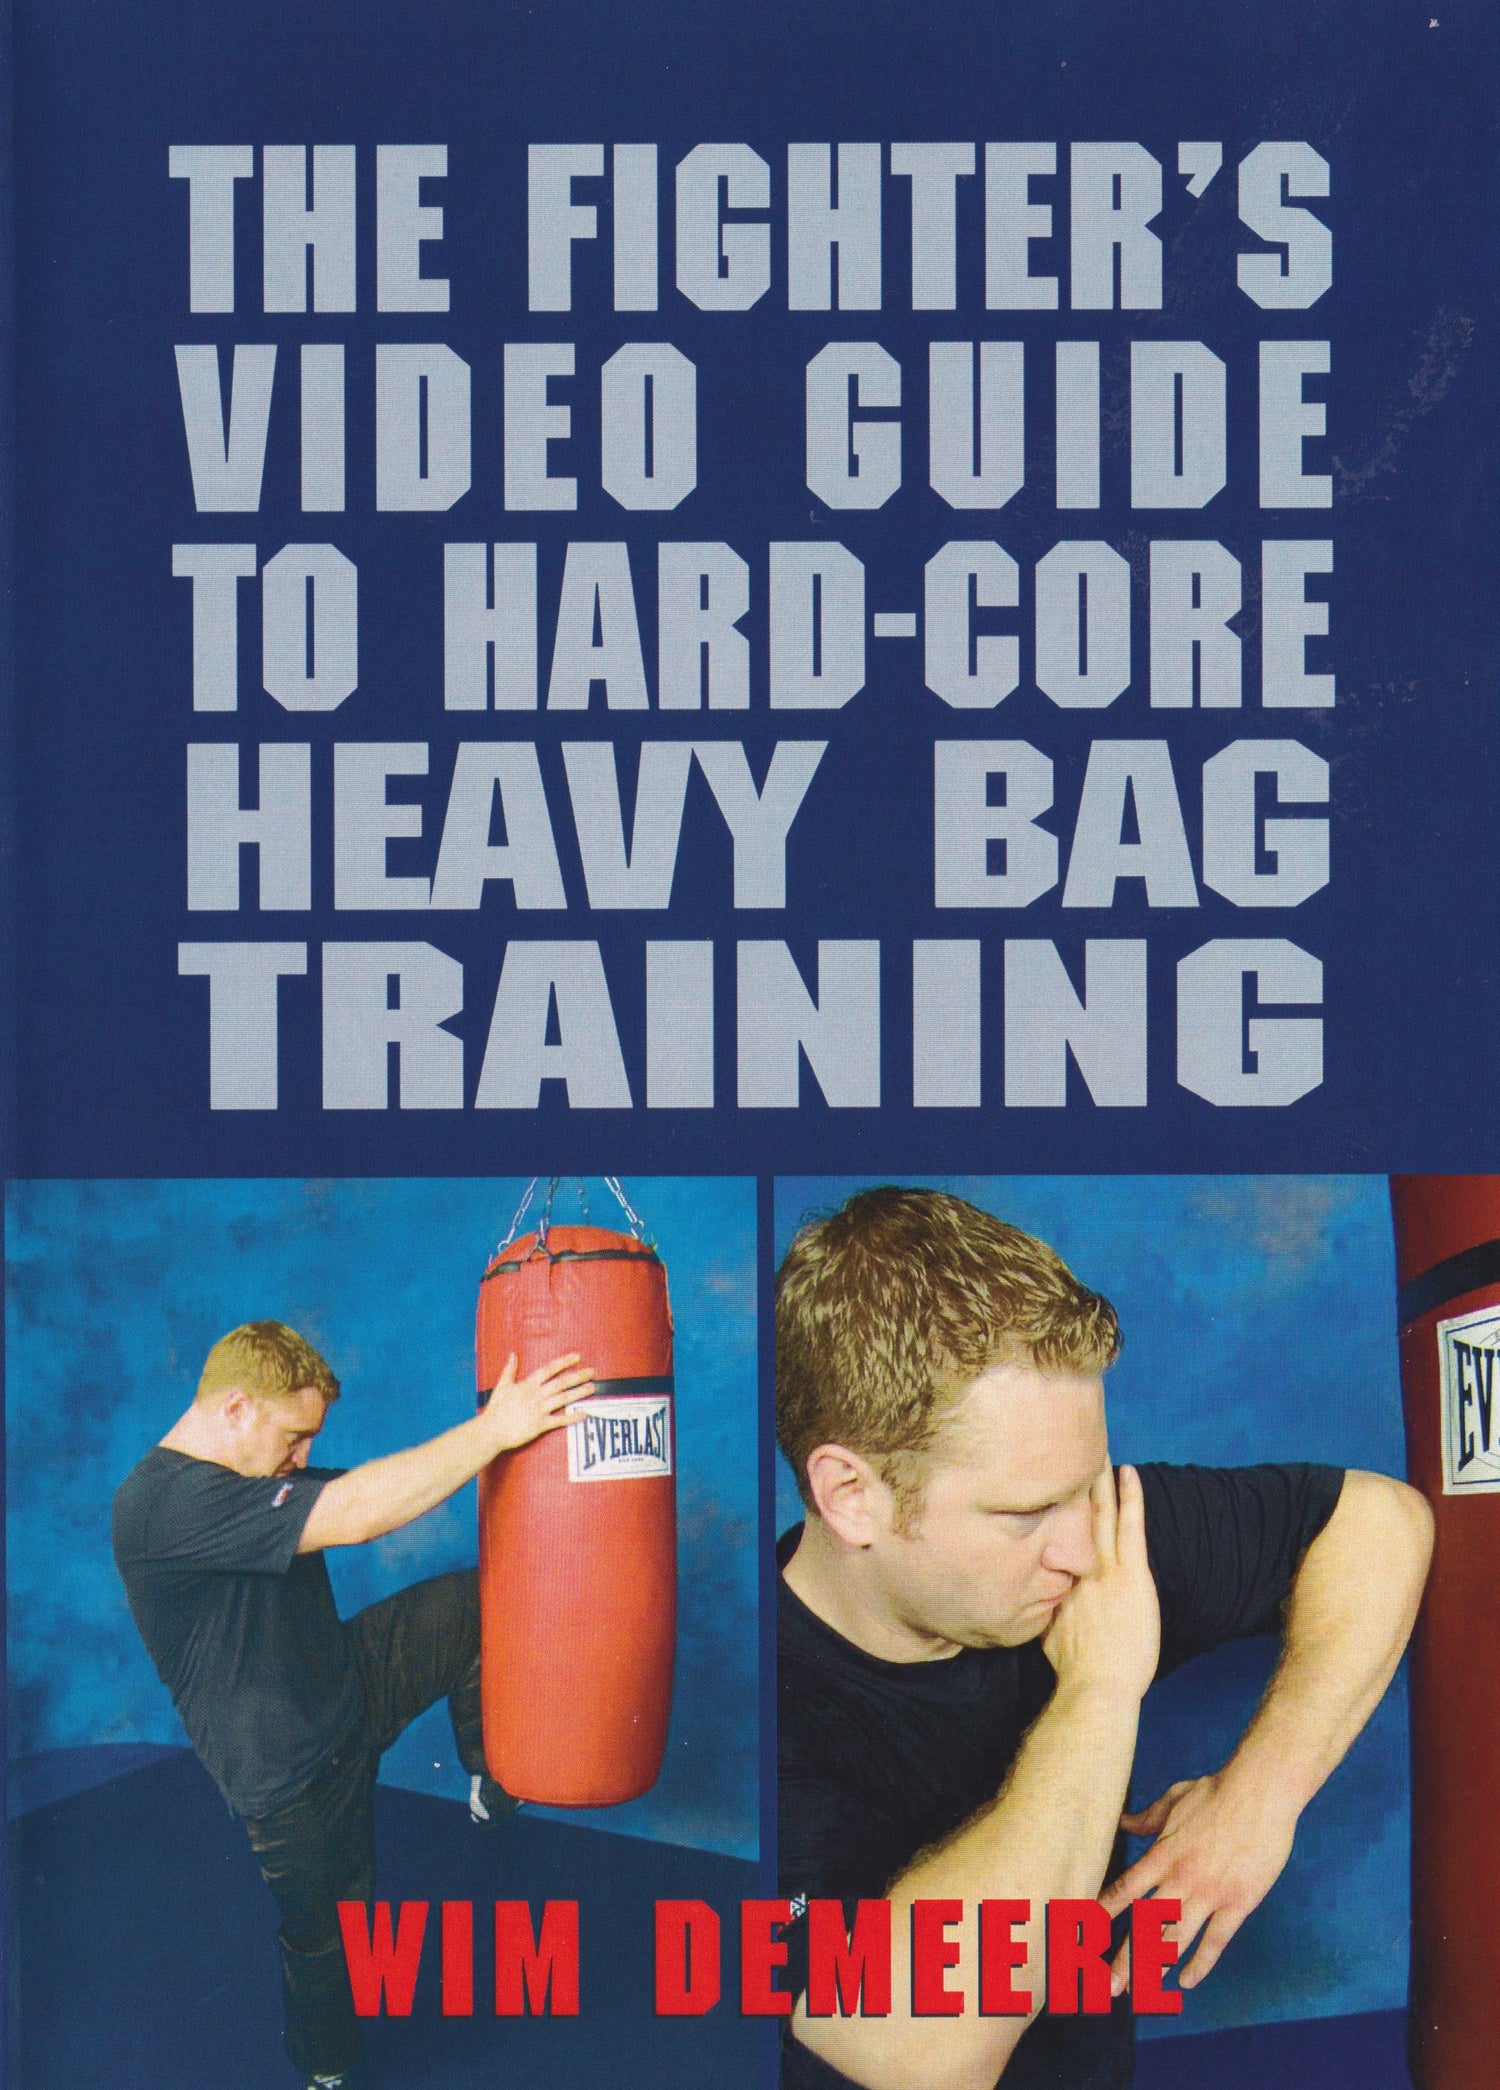 Fighters Video Guide to Hard-Core Heavy Bag Training 2 DVD Set by Wim Demeere (Preowned)